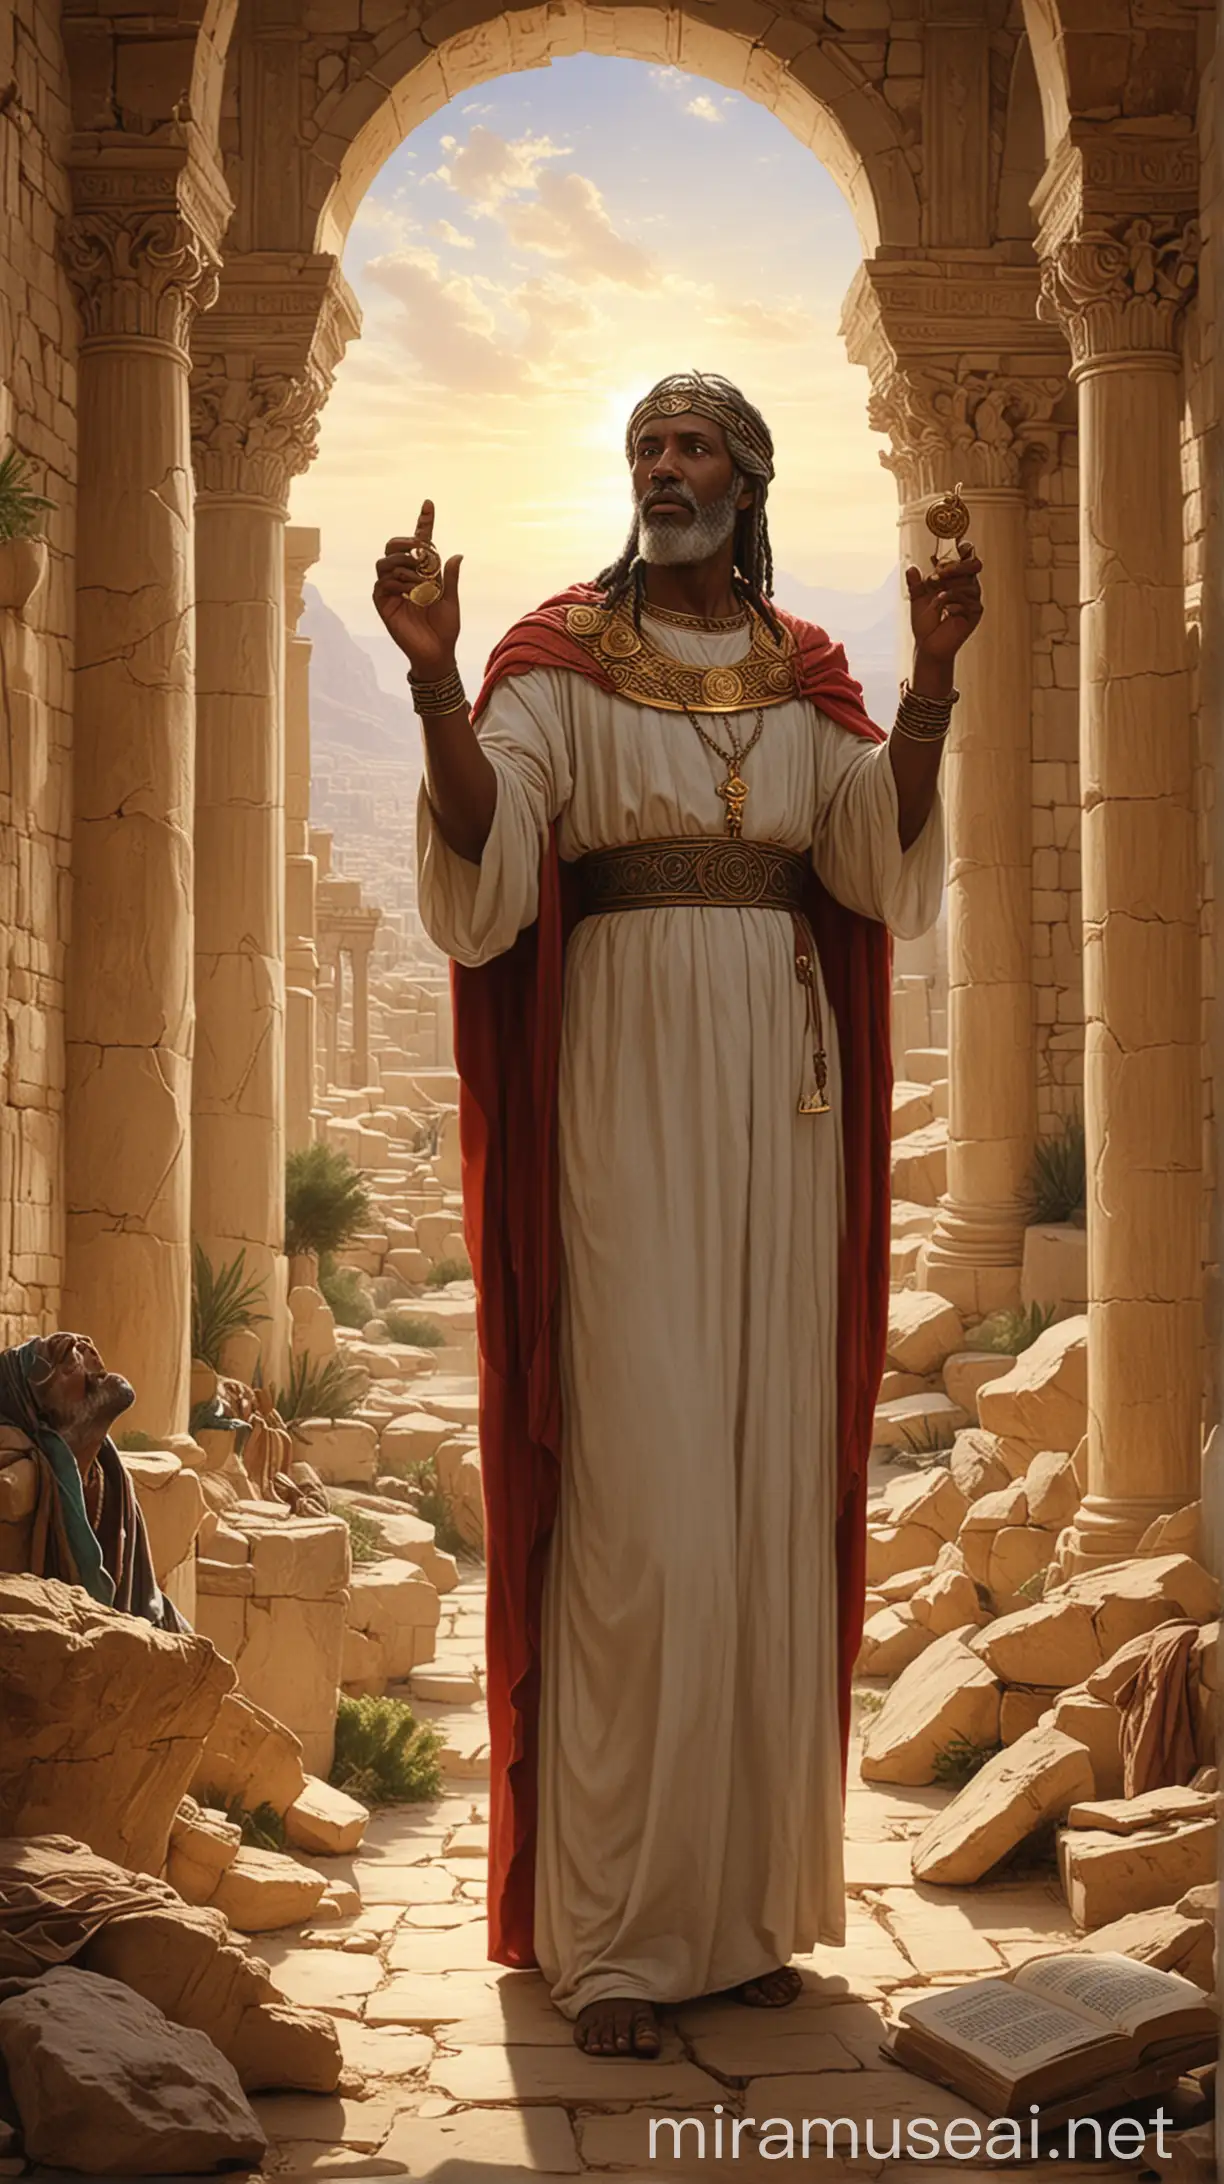 Image Prompt: Asaph authoring songs, including twelve psalms, and being recognized as a seer. In ancient world 